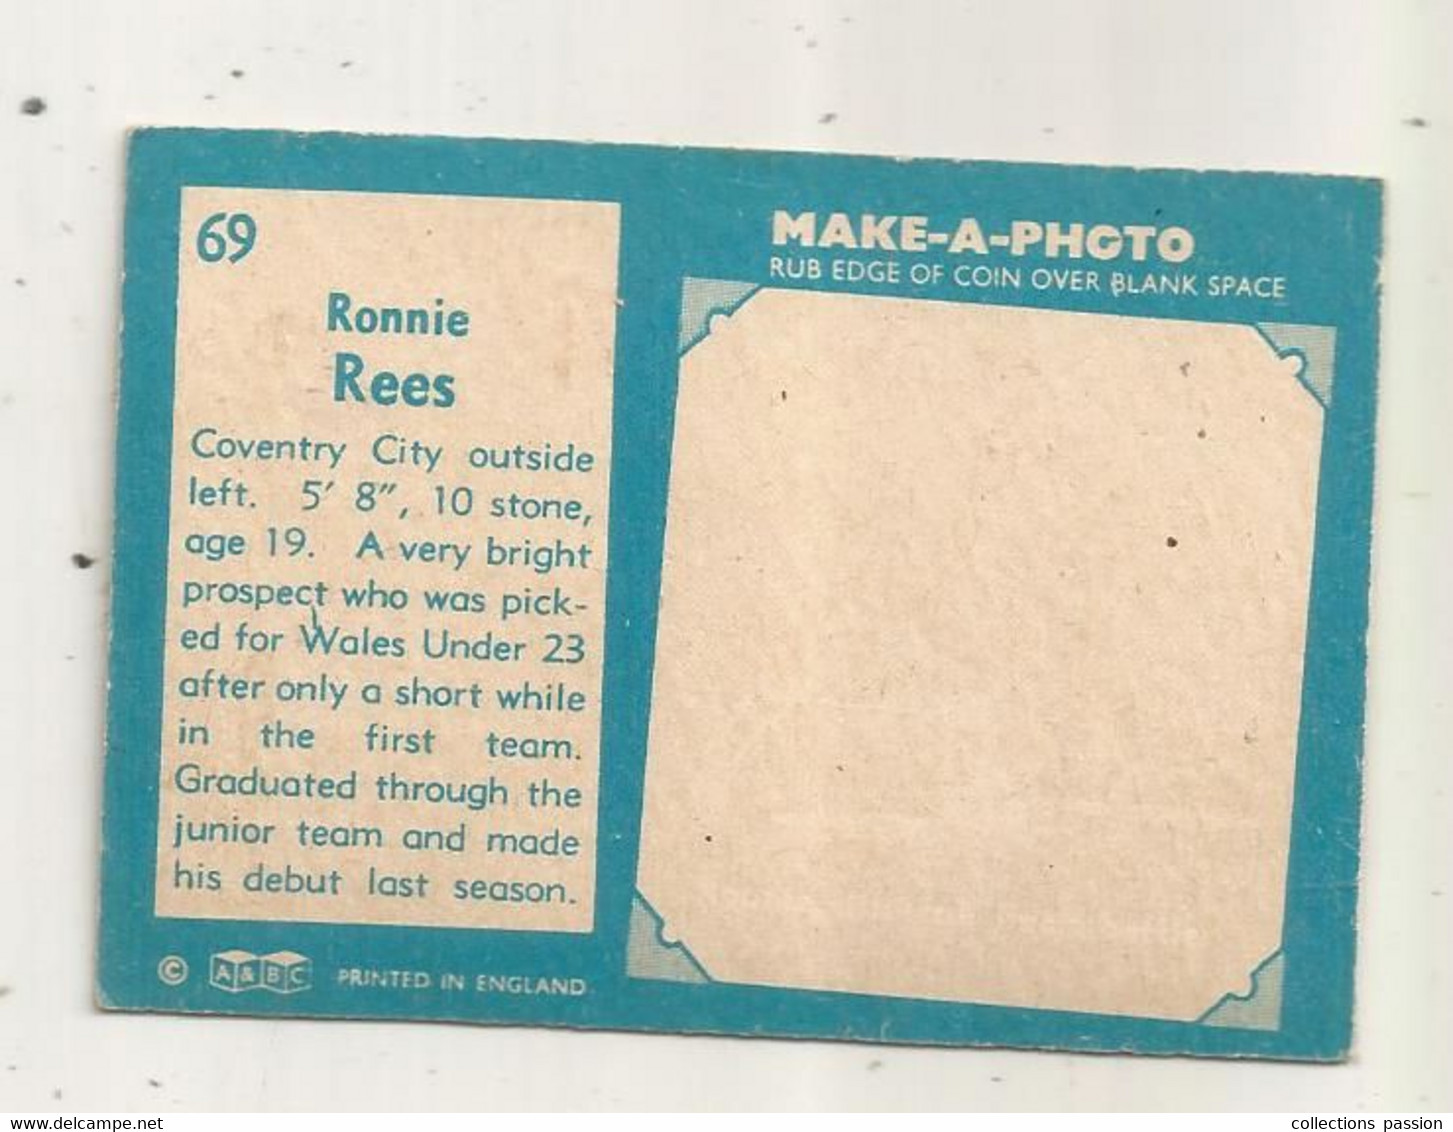 Trading Card , A&BC , England, Chewing Gum, Serie: Make A Photo , Année 60 , N° 69, RONNIE REES,  Coventry City - Trading Cards